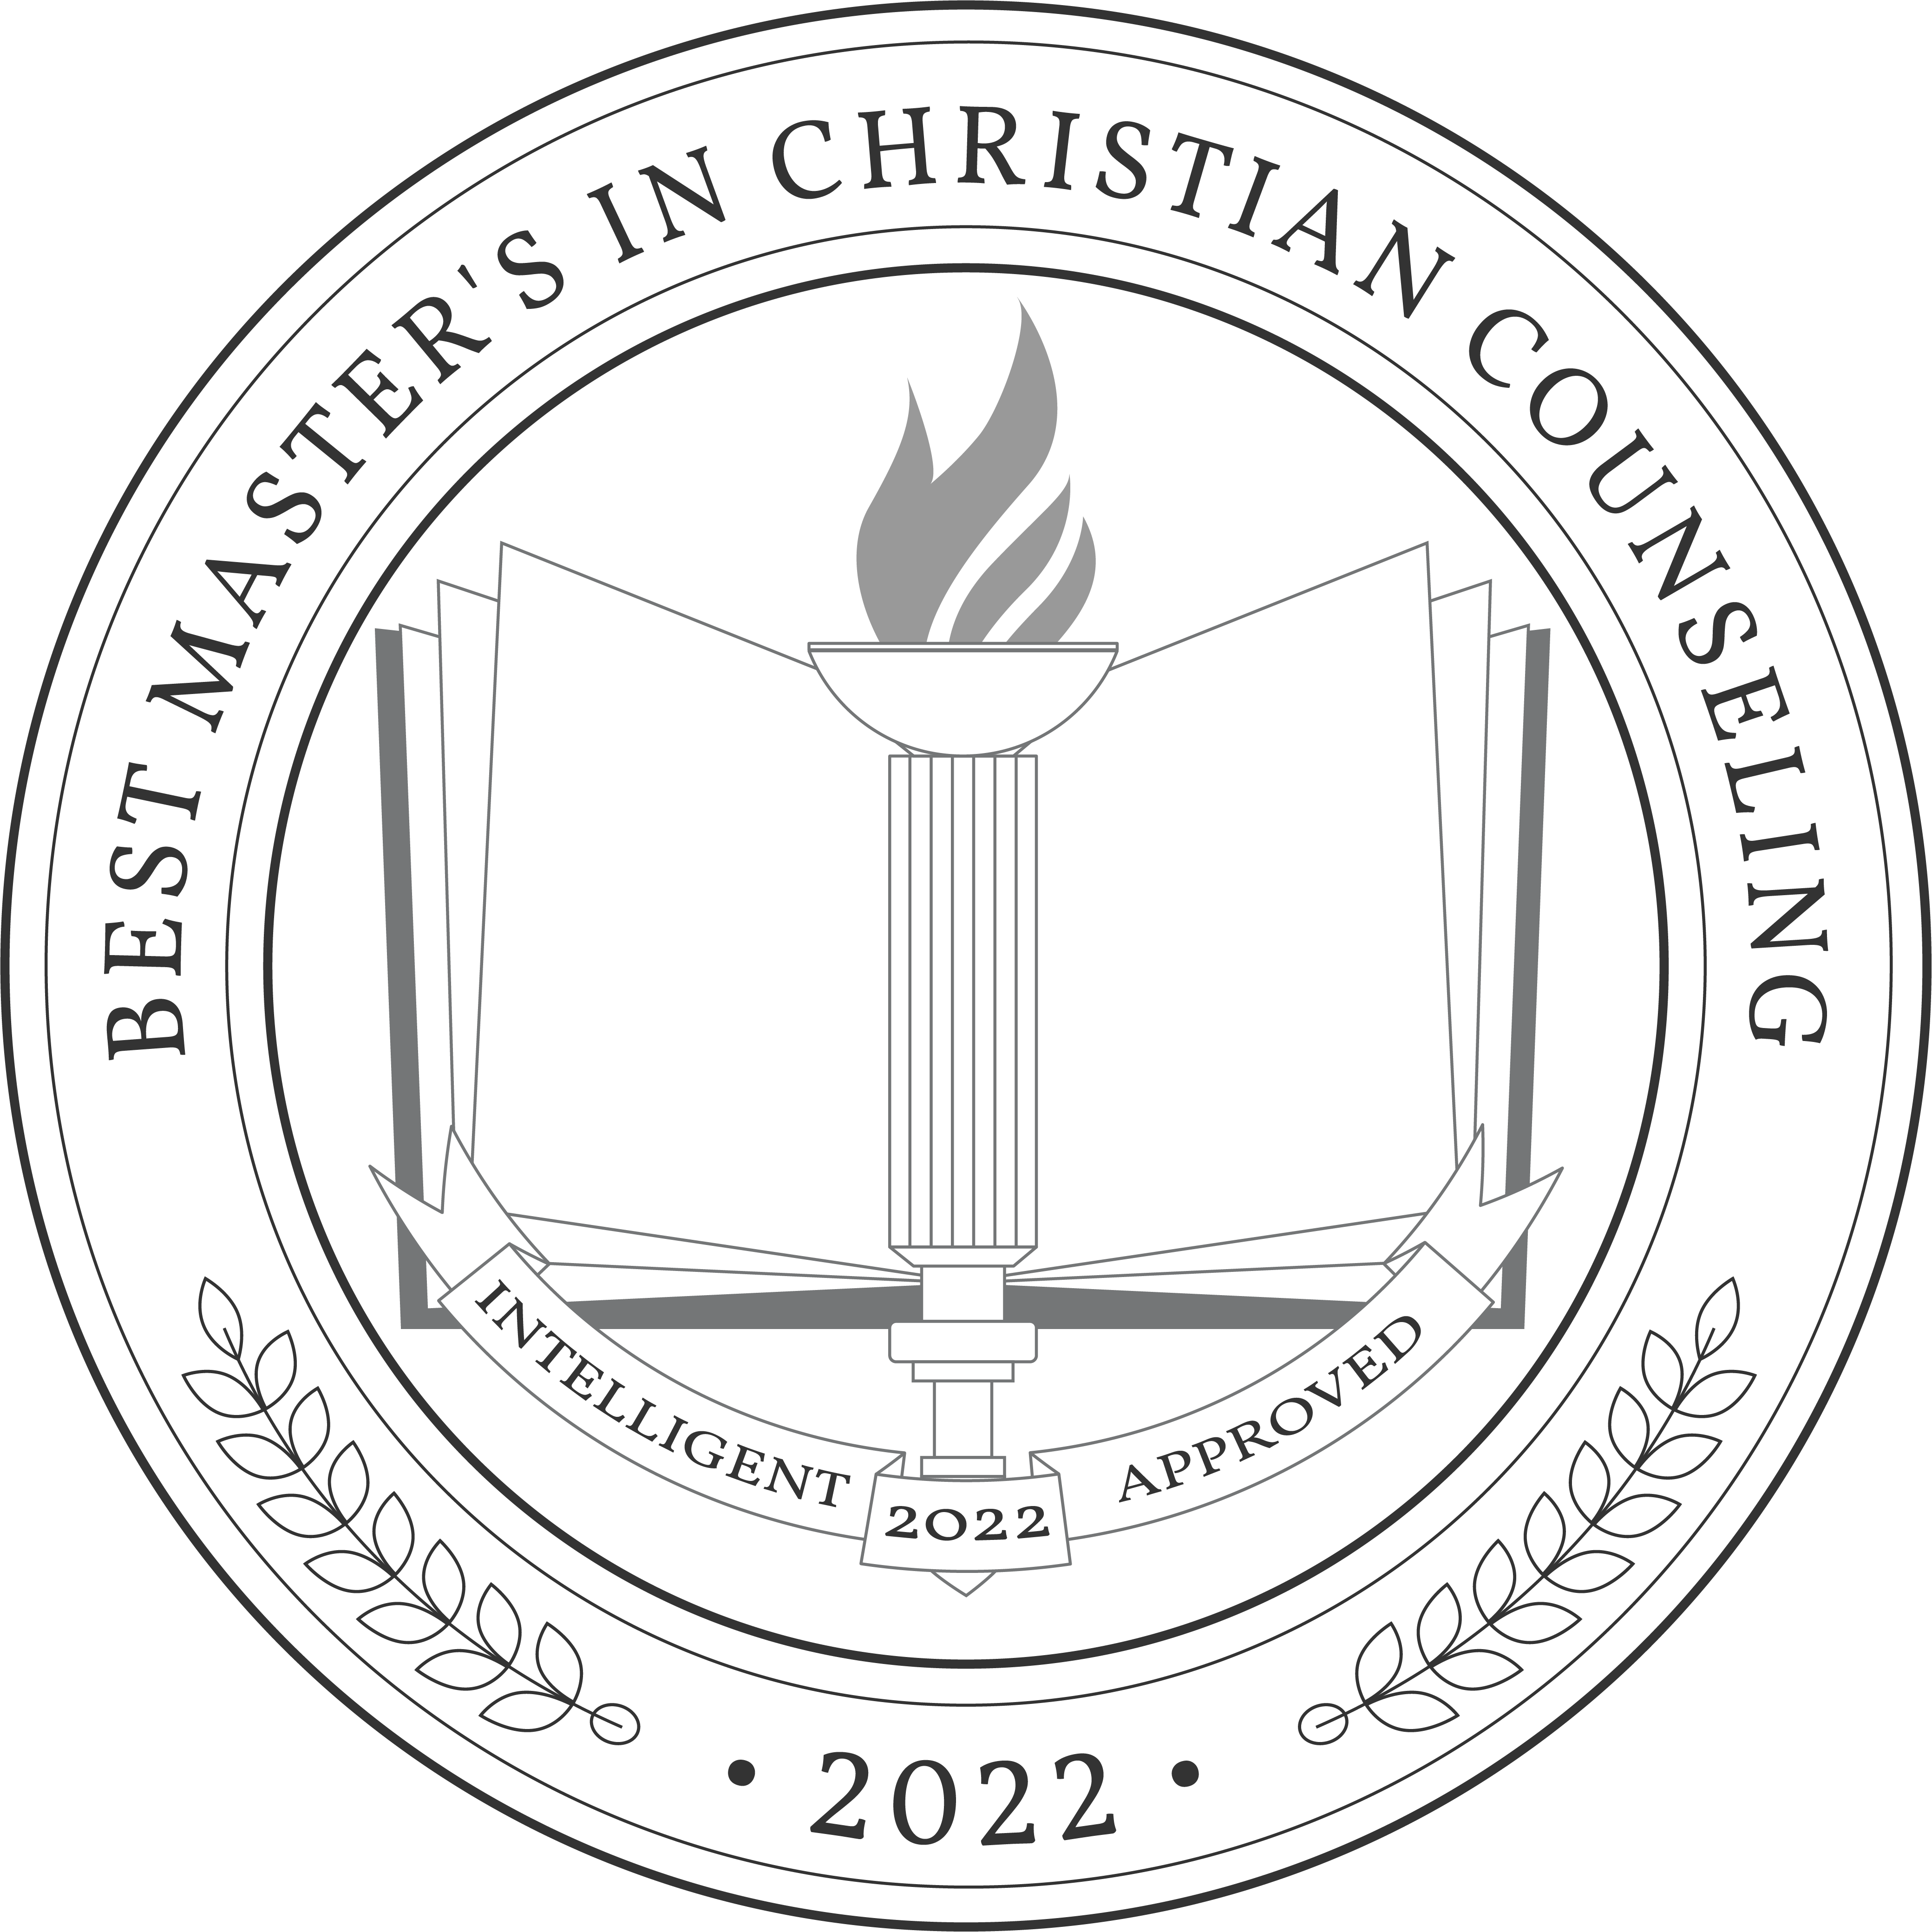 Best Master's in Christian Counseling Degree Programs